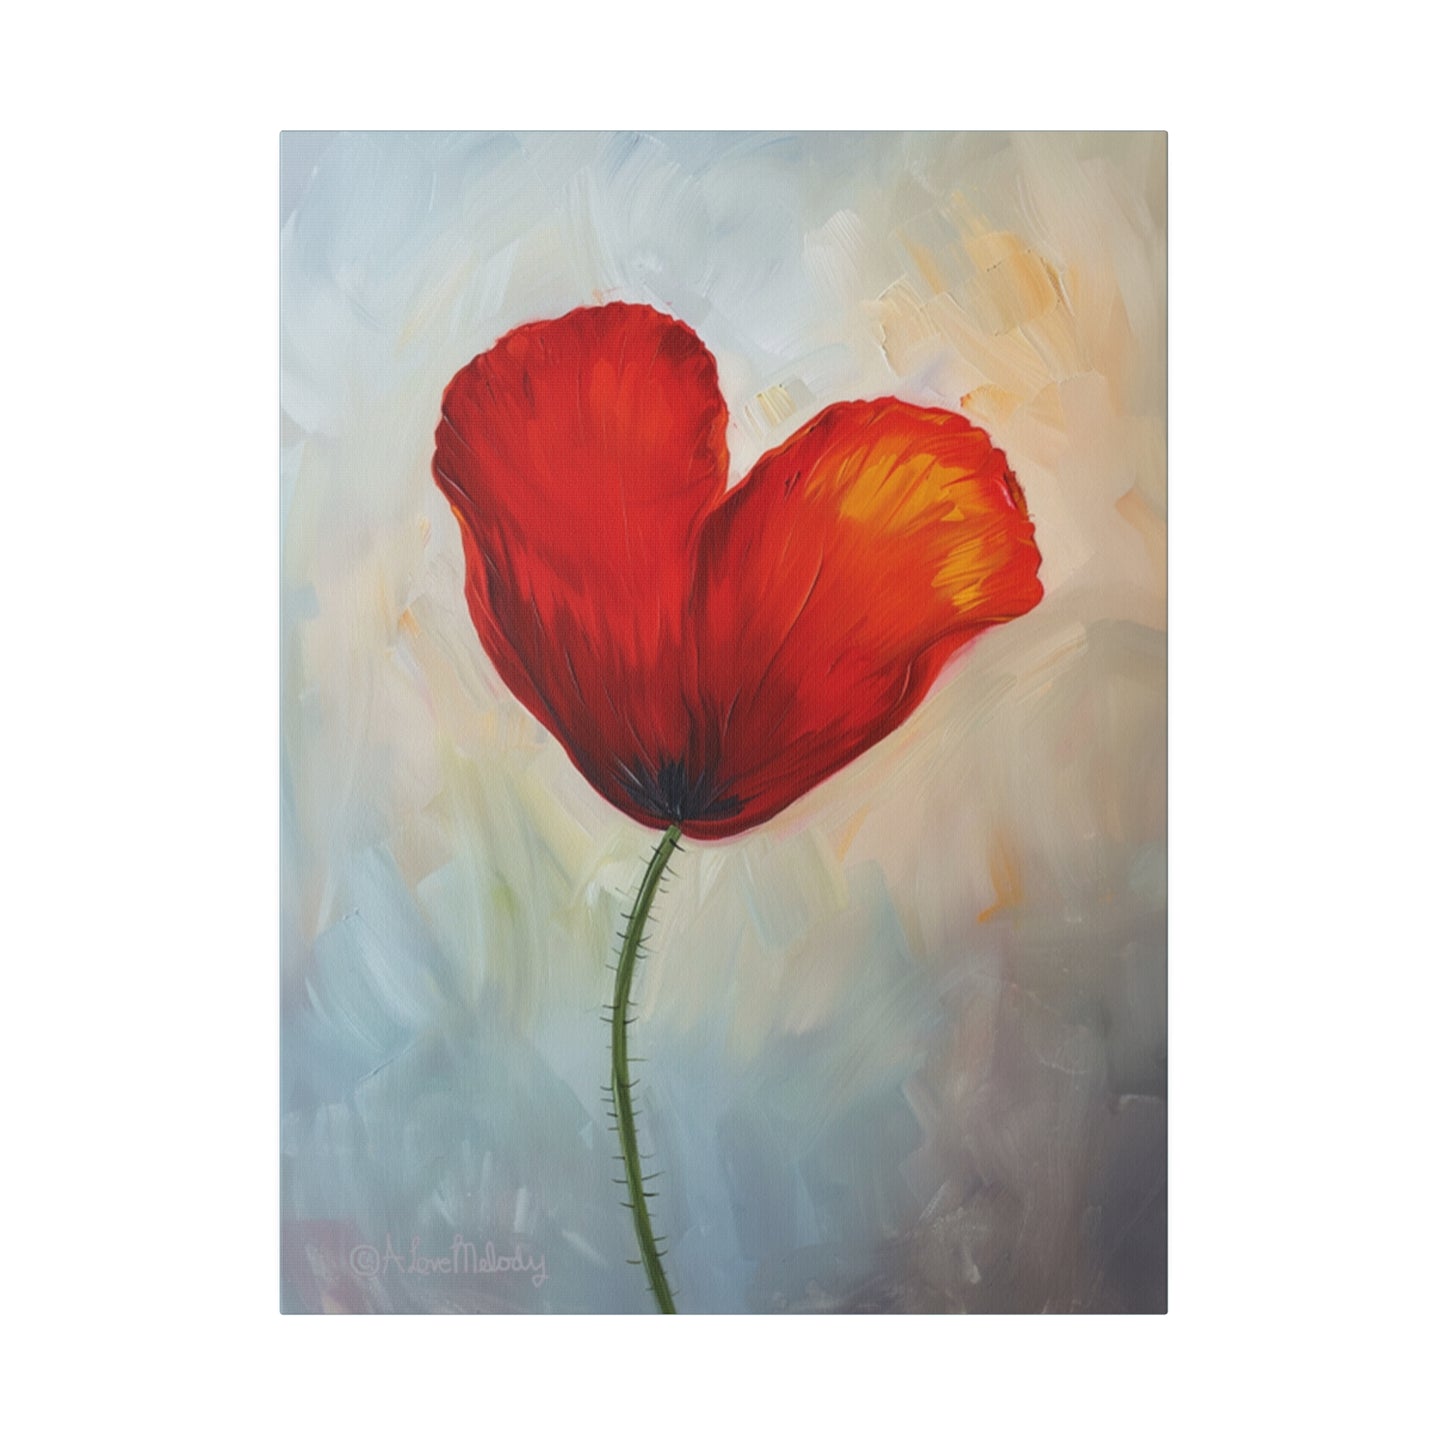 Poppy Flower Heart Painting Print on Matte Canvas, Stretched, 0.75"